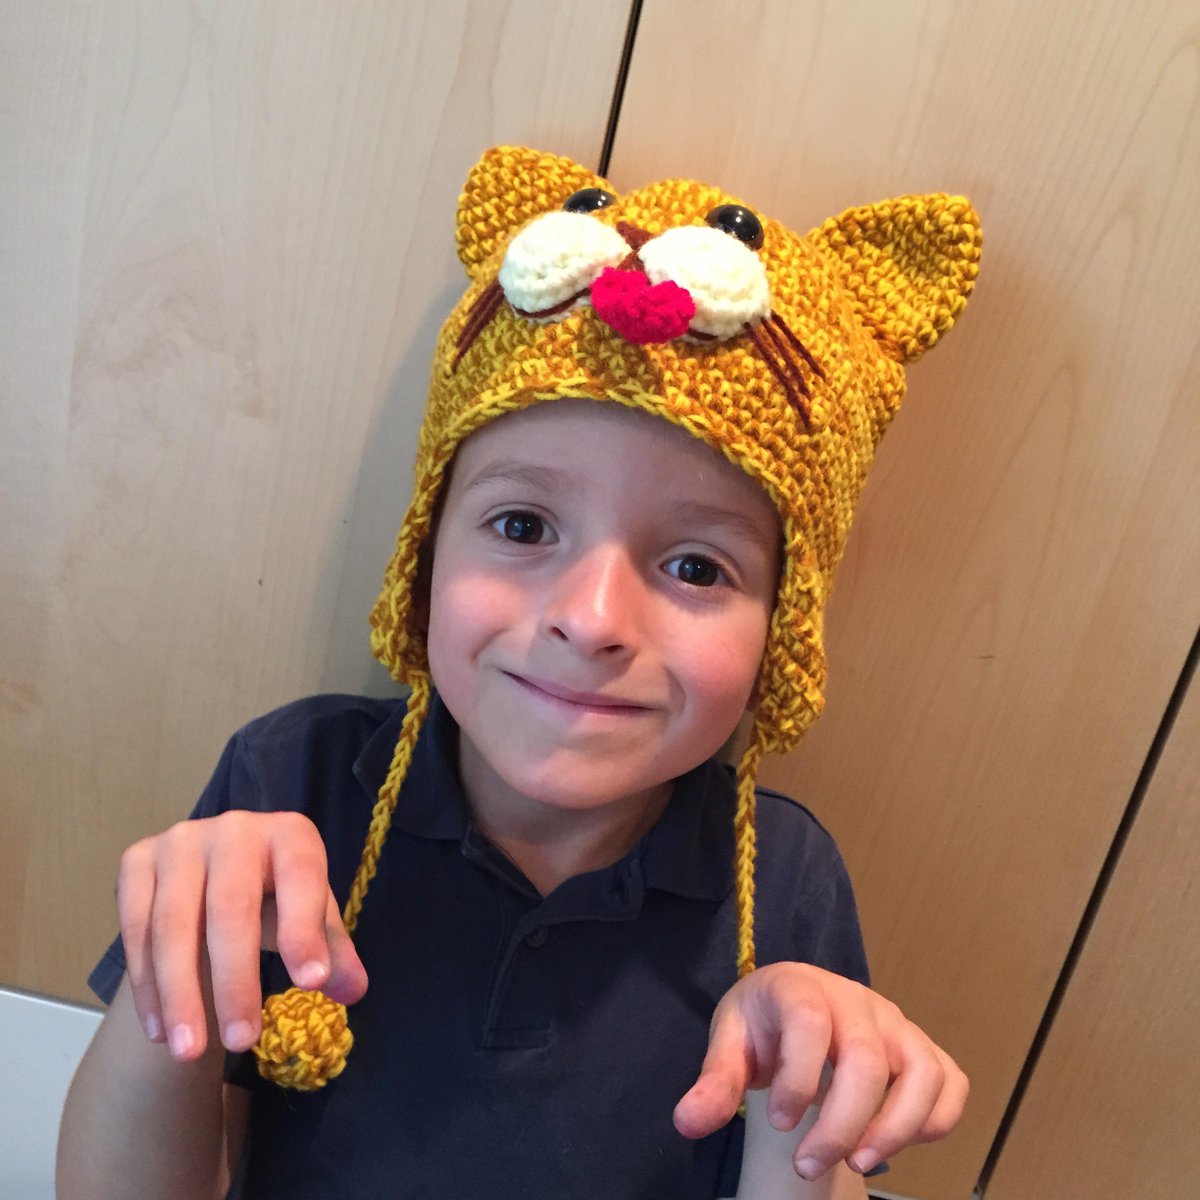 markabrinton: Thanks @MailChimp for the swag! Huge hit with the kids #ImagineCommerce #Mailchimp #cathat #MagentoImagine #magento http://t.co/ZSV4yBT4P2